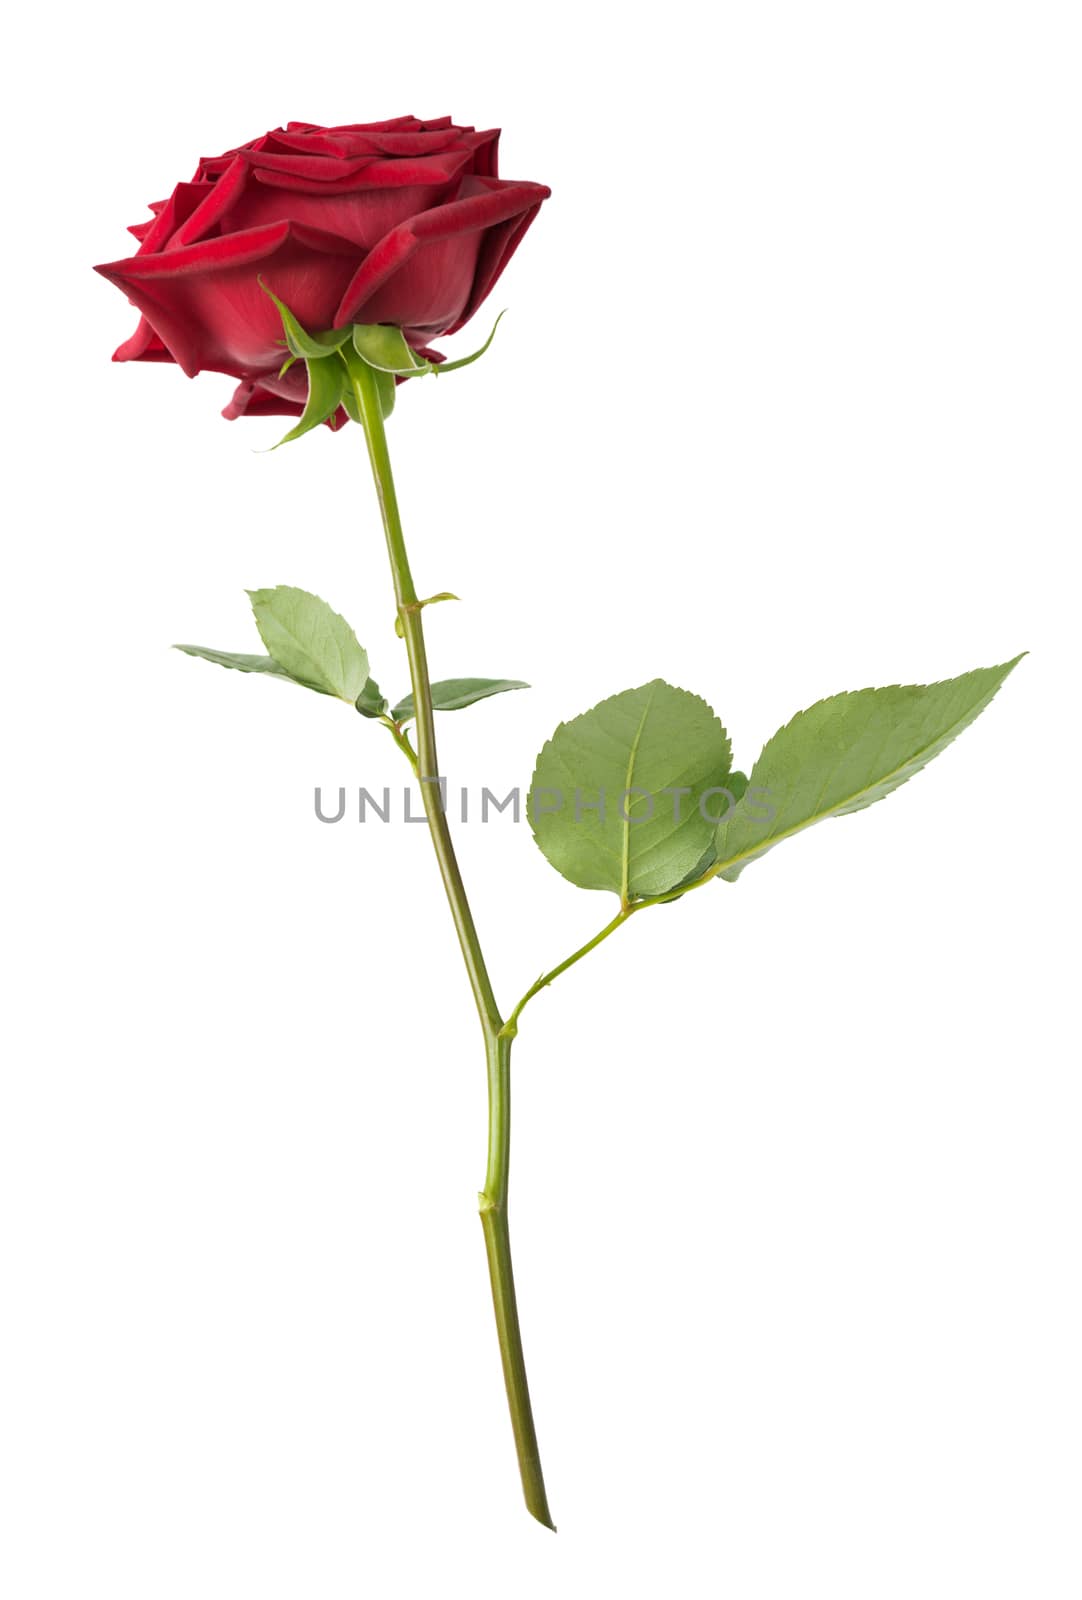 Red rose on a white background by Epitavi